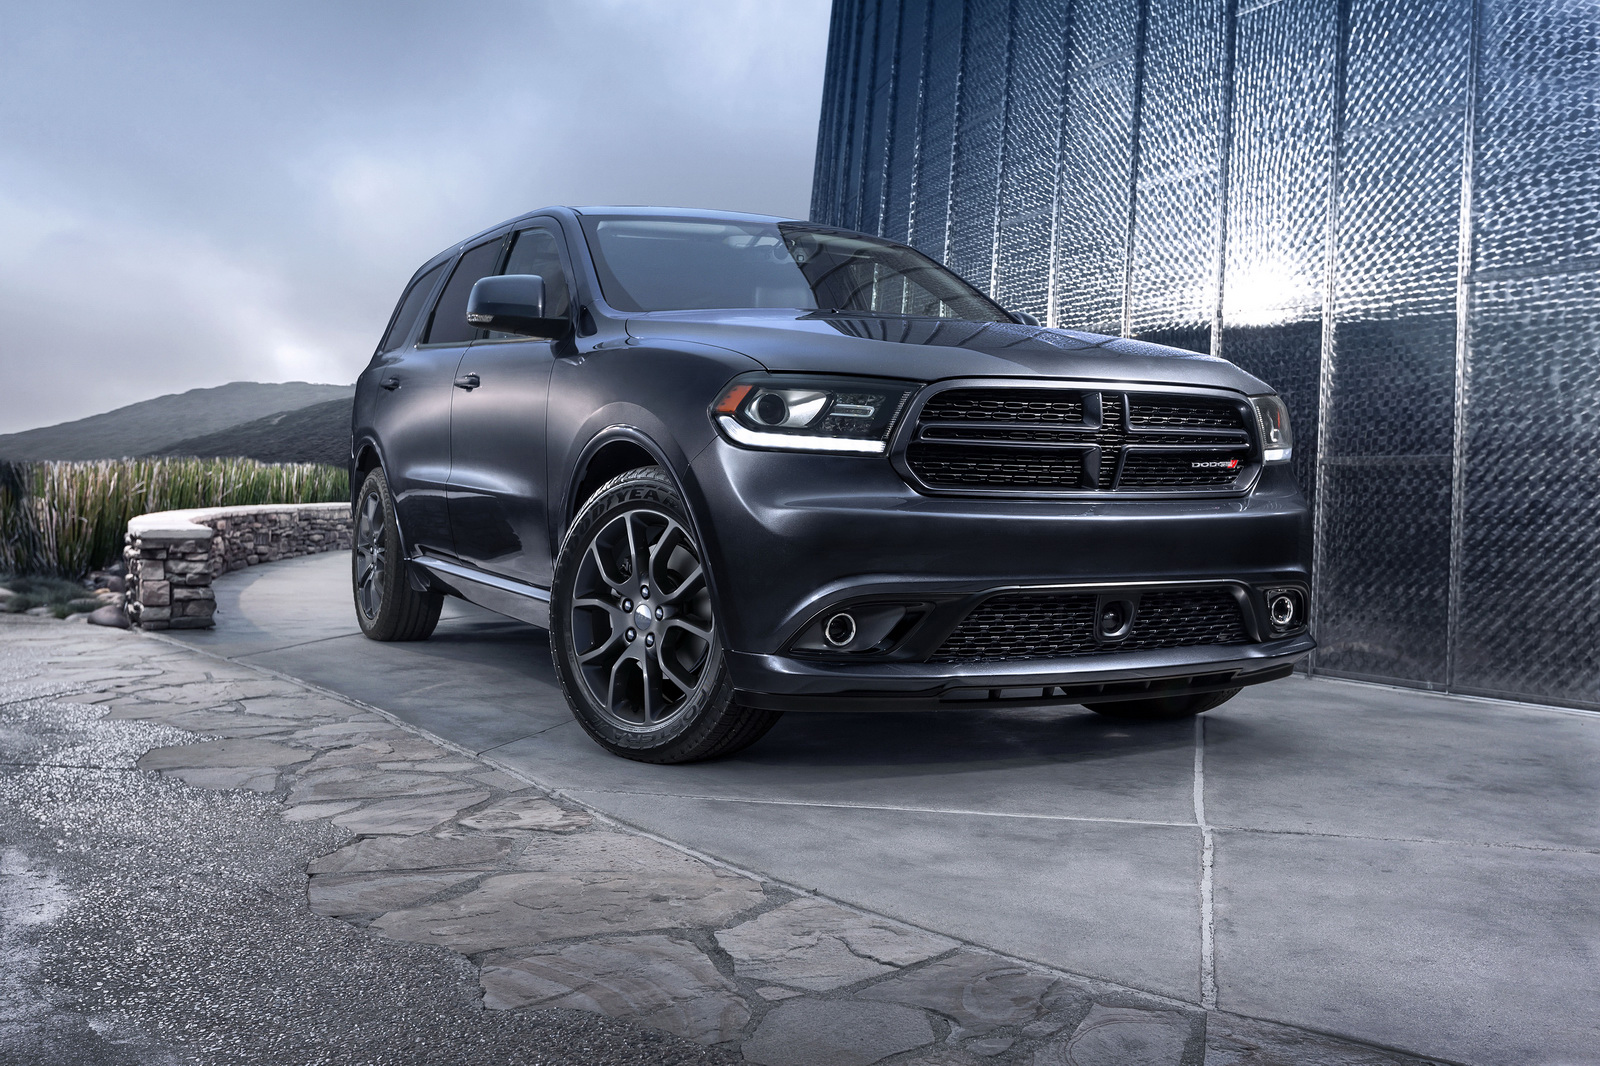 2015 Dodge Durango R T Gets Optional Red Leather Seats 